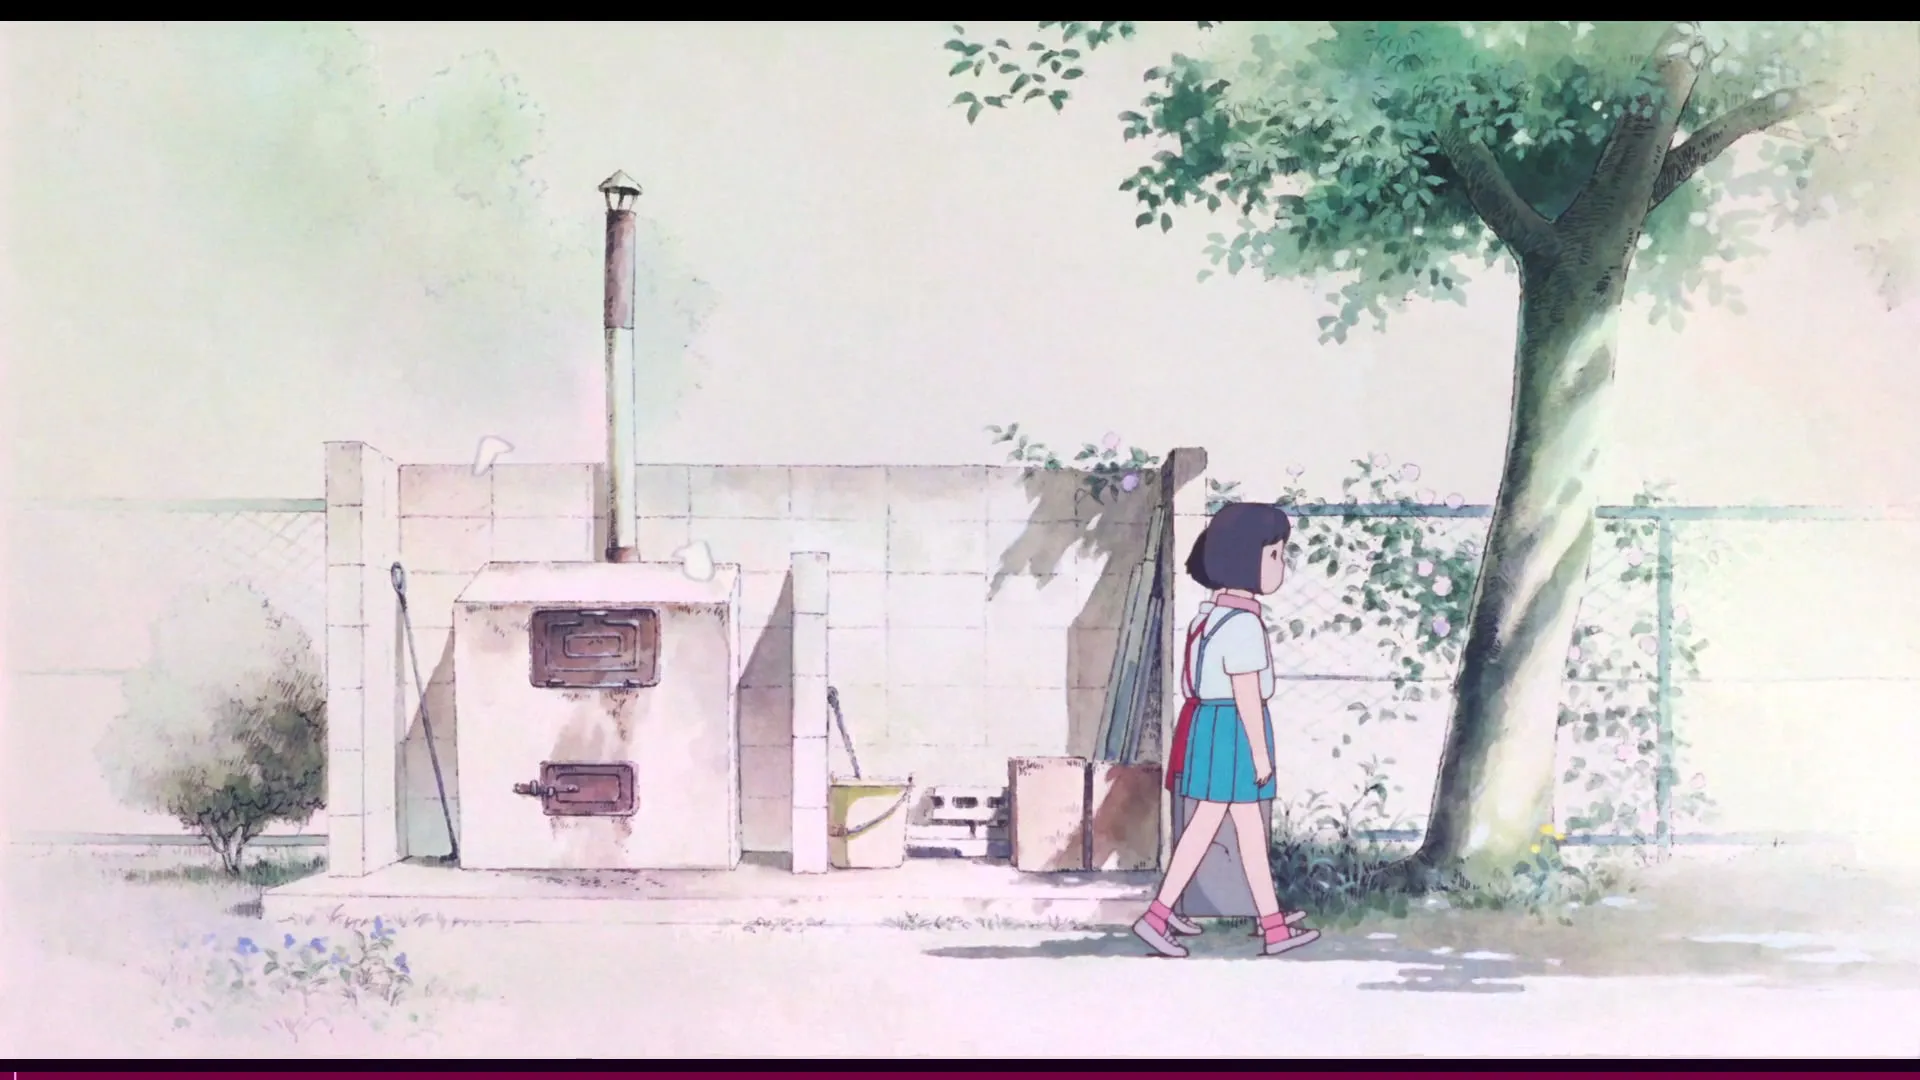 Screenshot 4 from the anime